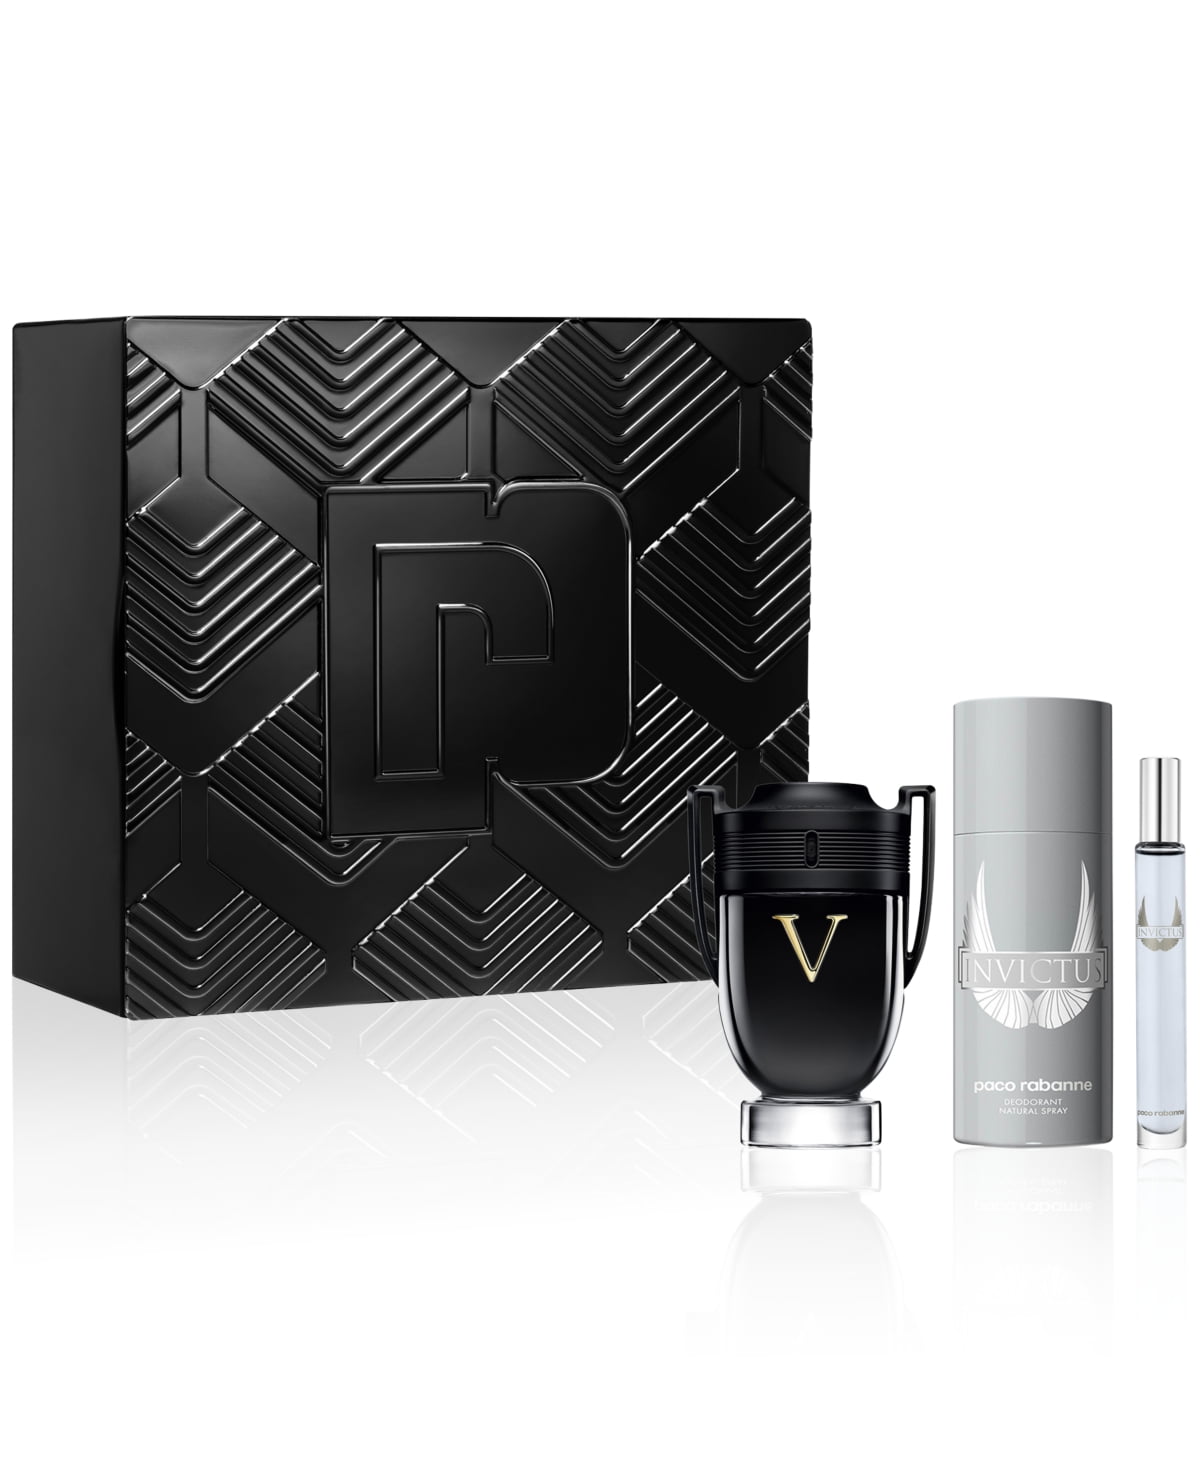 Invictus Victory by PACO RABANNE Gift Set(3.4oz EDP+ 5oz DEO SPRAY + EDP ) for MEN -